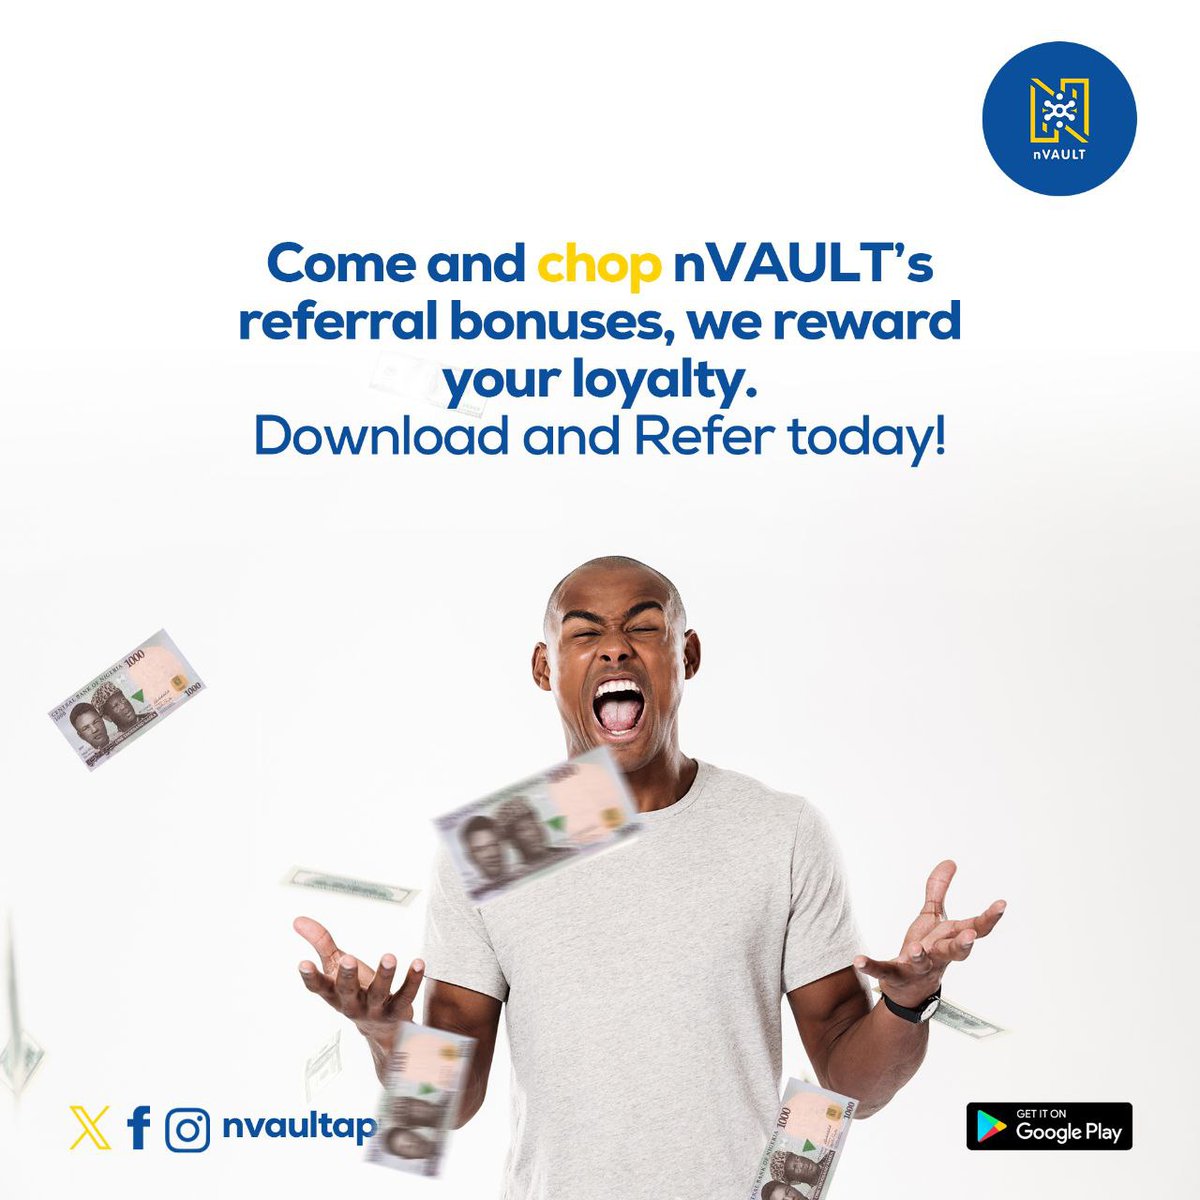 Download now and start sharing the wealth with friends! #nVAULT #ReferralBonuses #ShareTheWealth